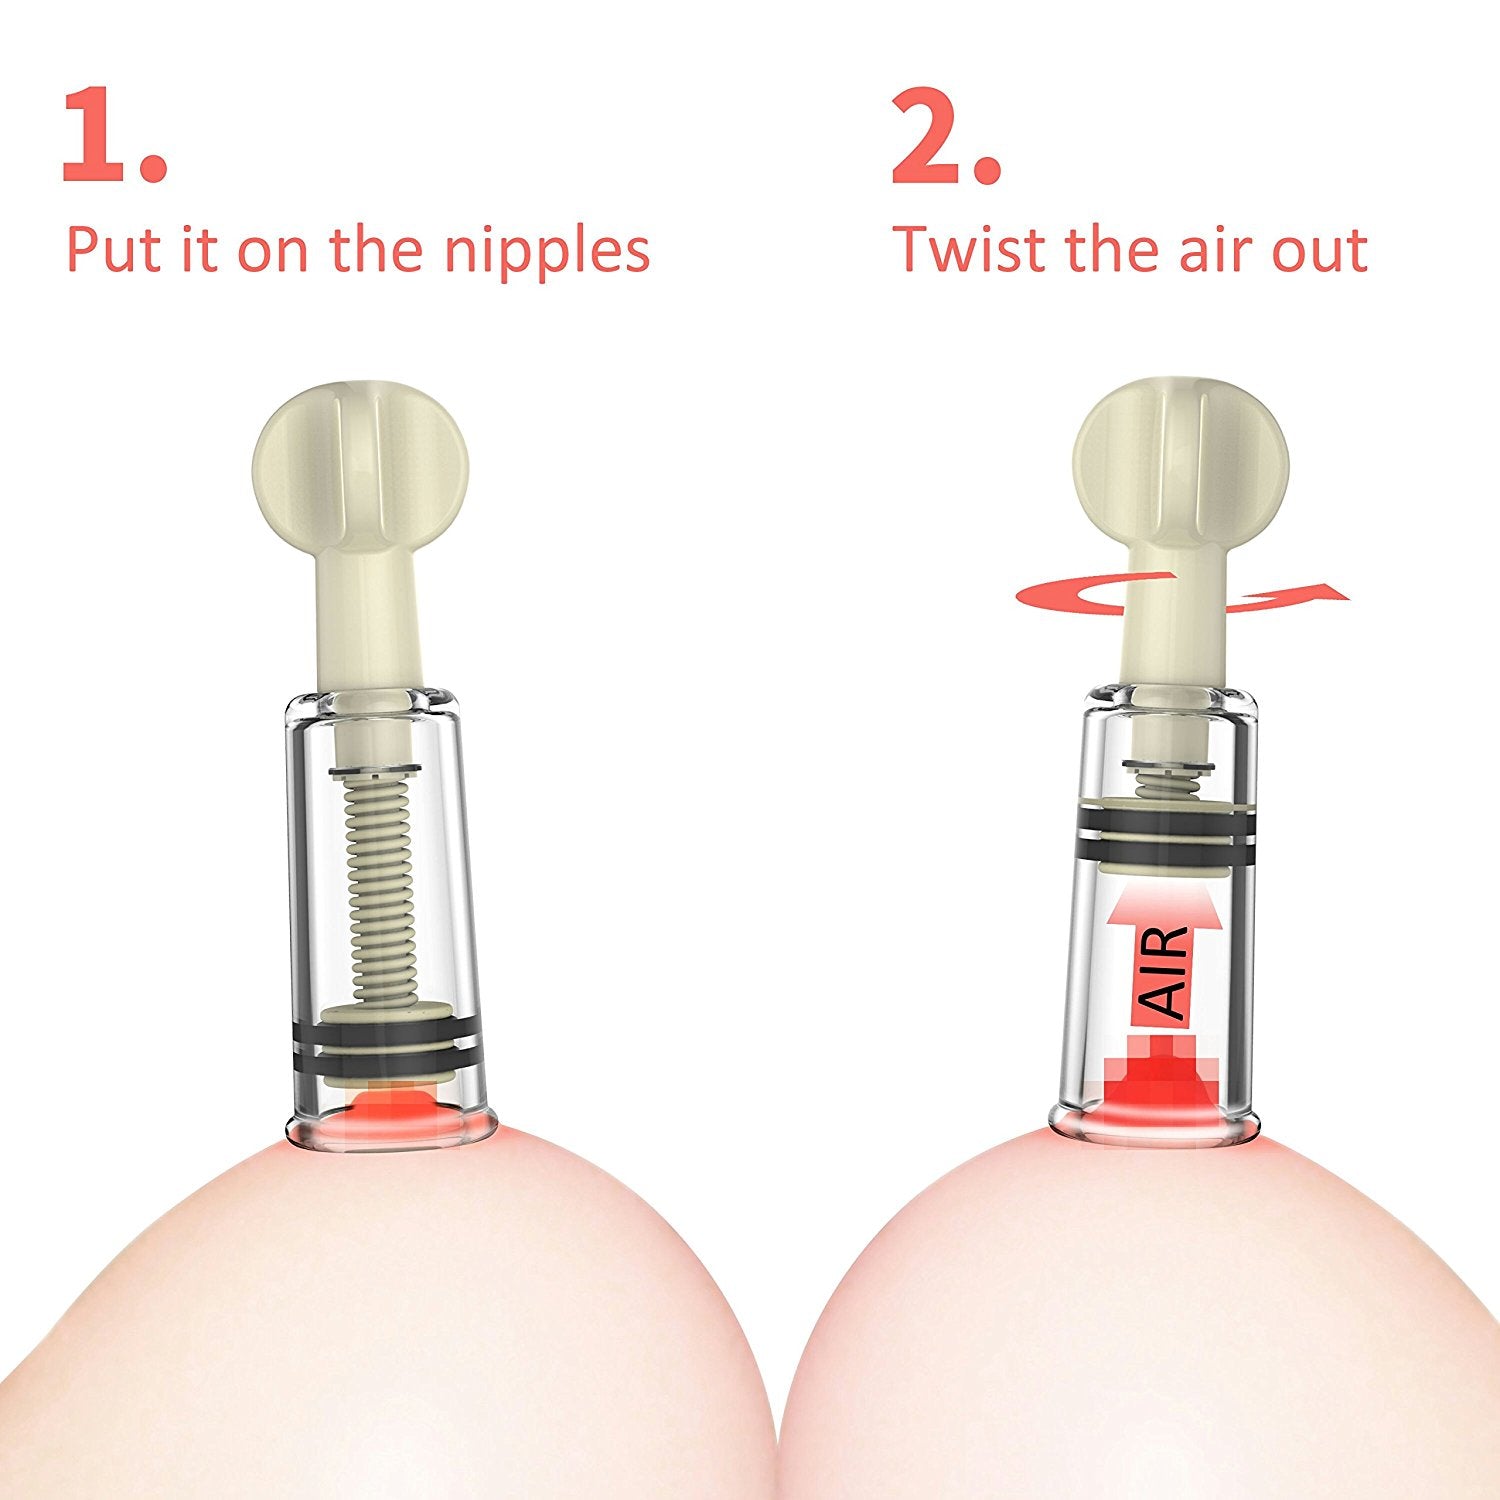 denise grierson recommends nipple suction pictures pic